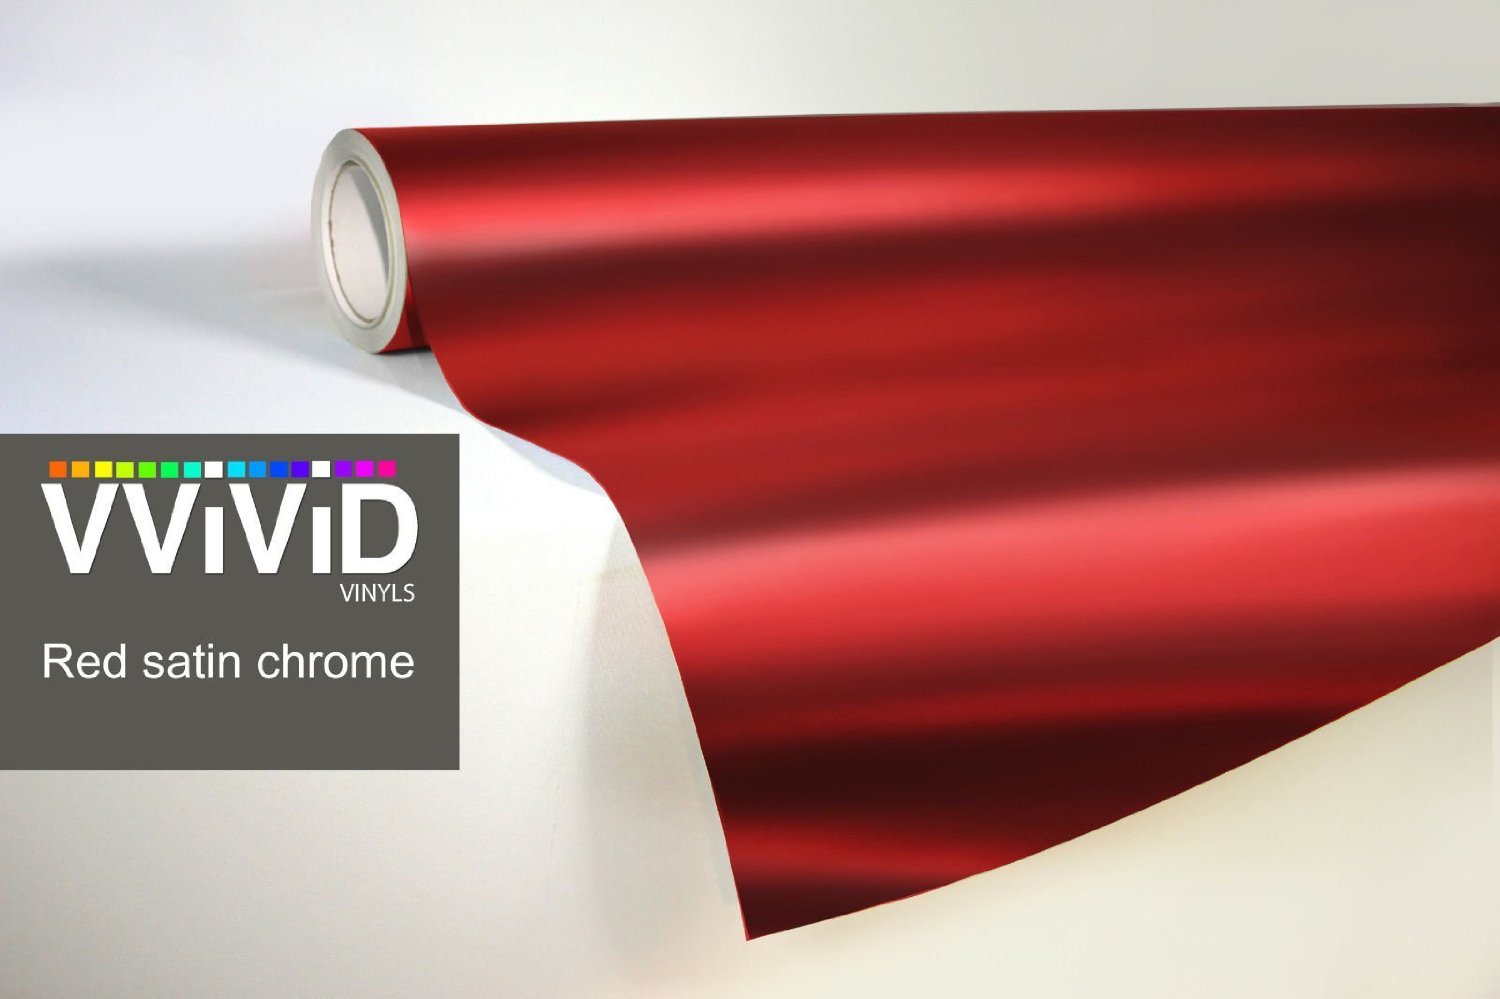 Red Satin Chrome Conformable Stretch Vinyl Wrap Roll with VViViD XPO Air Release Technology - 2ft x 5ft